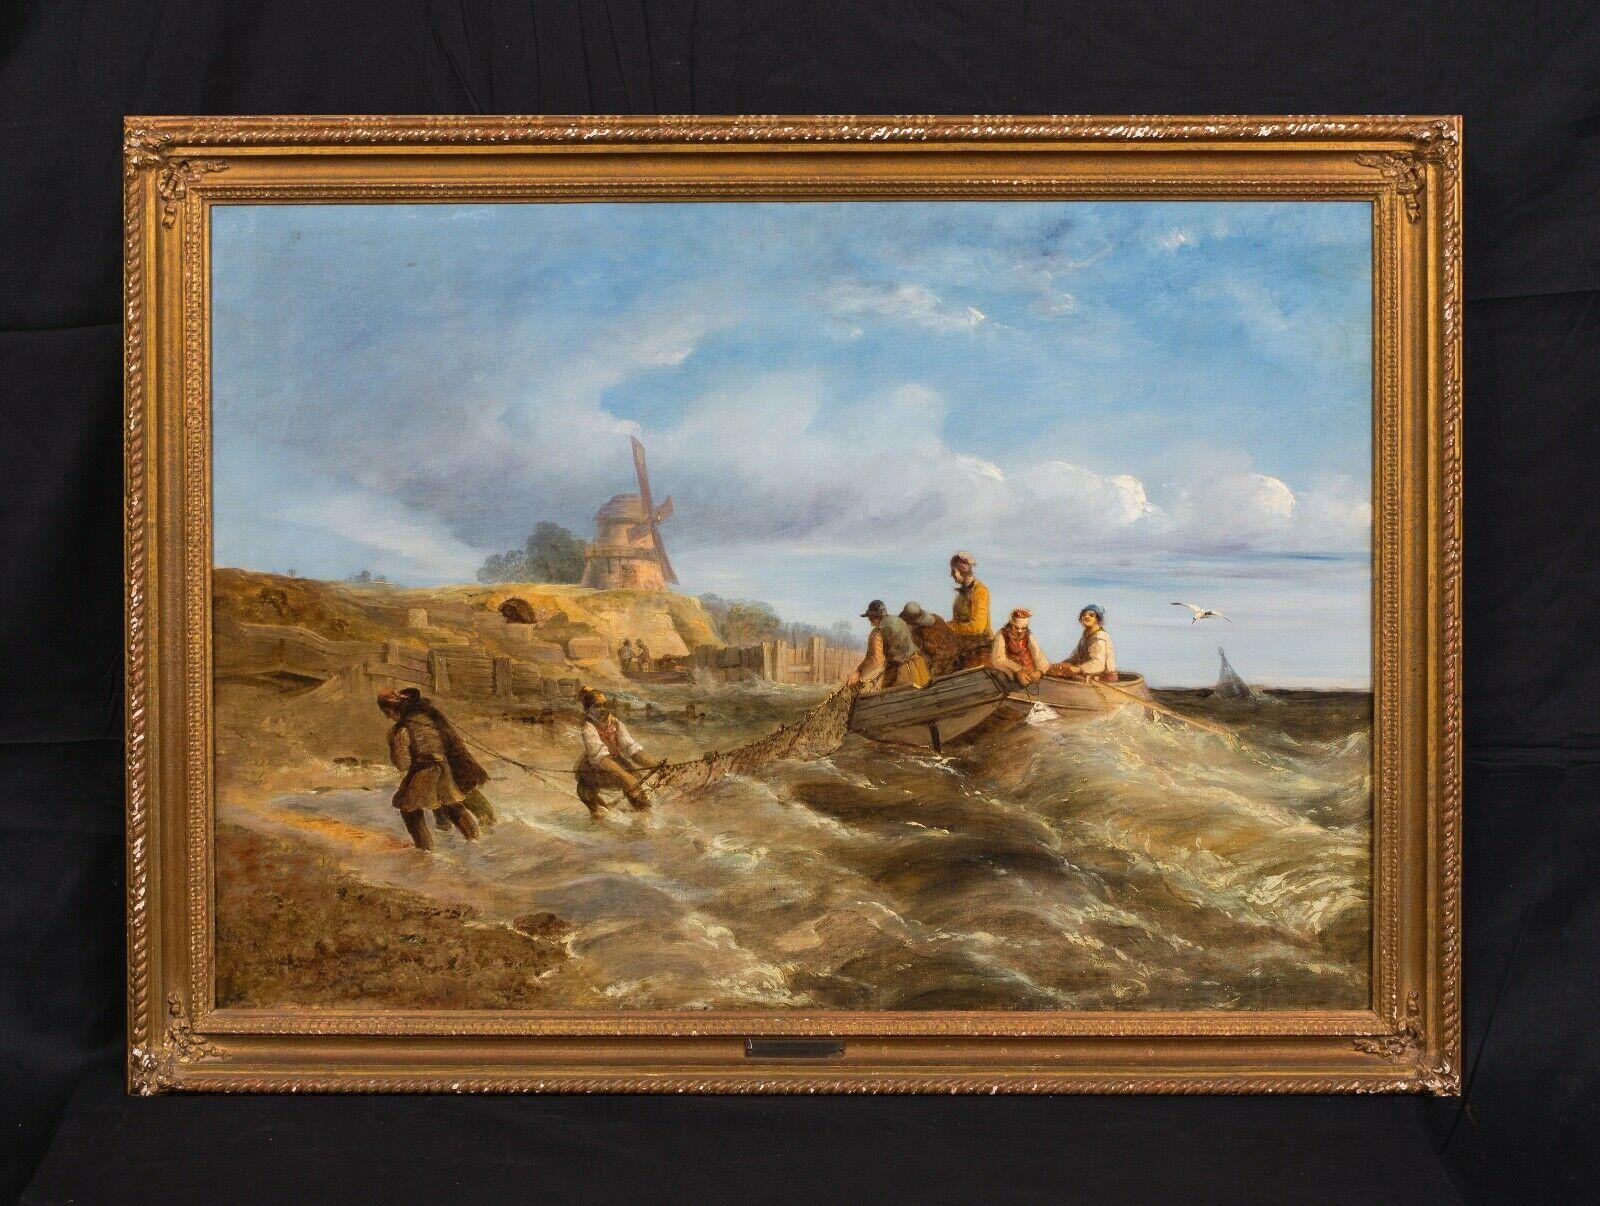 Bringing In The Nets, 19th Century - Painting by George Chambers